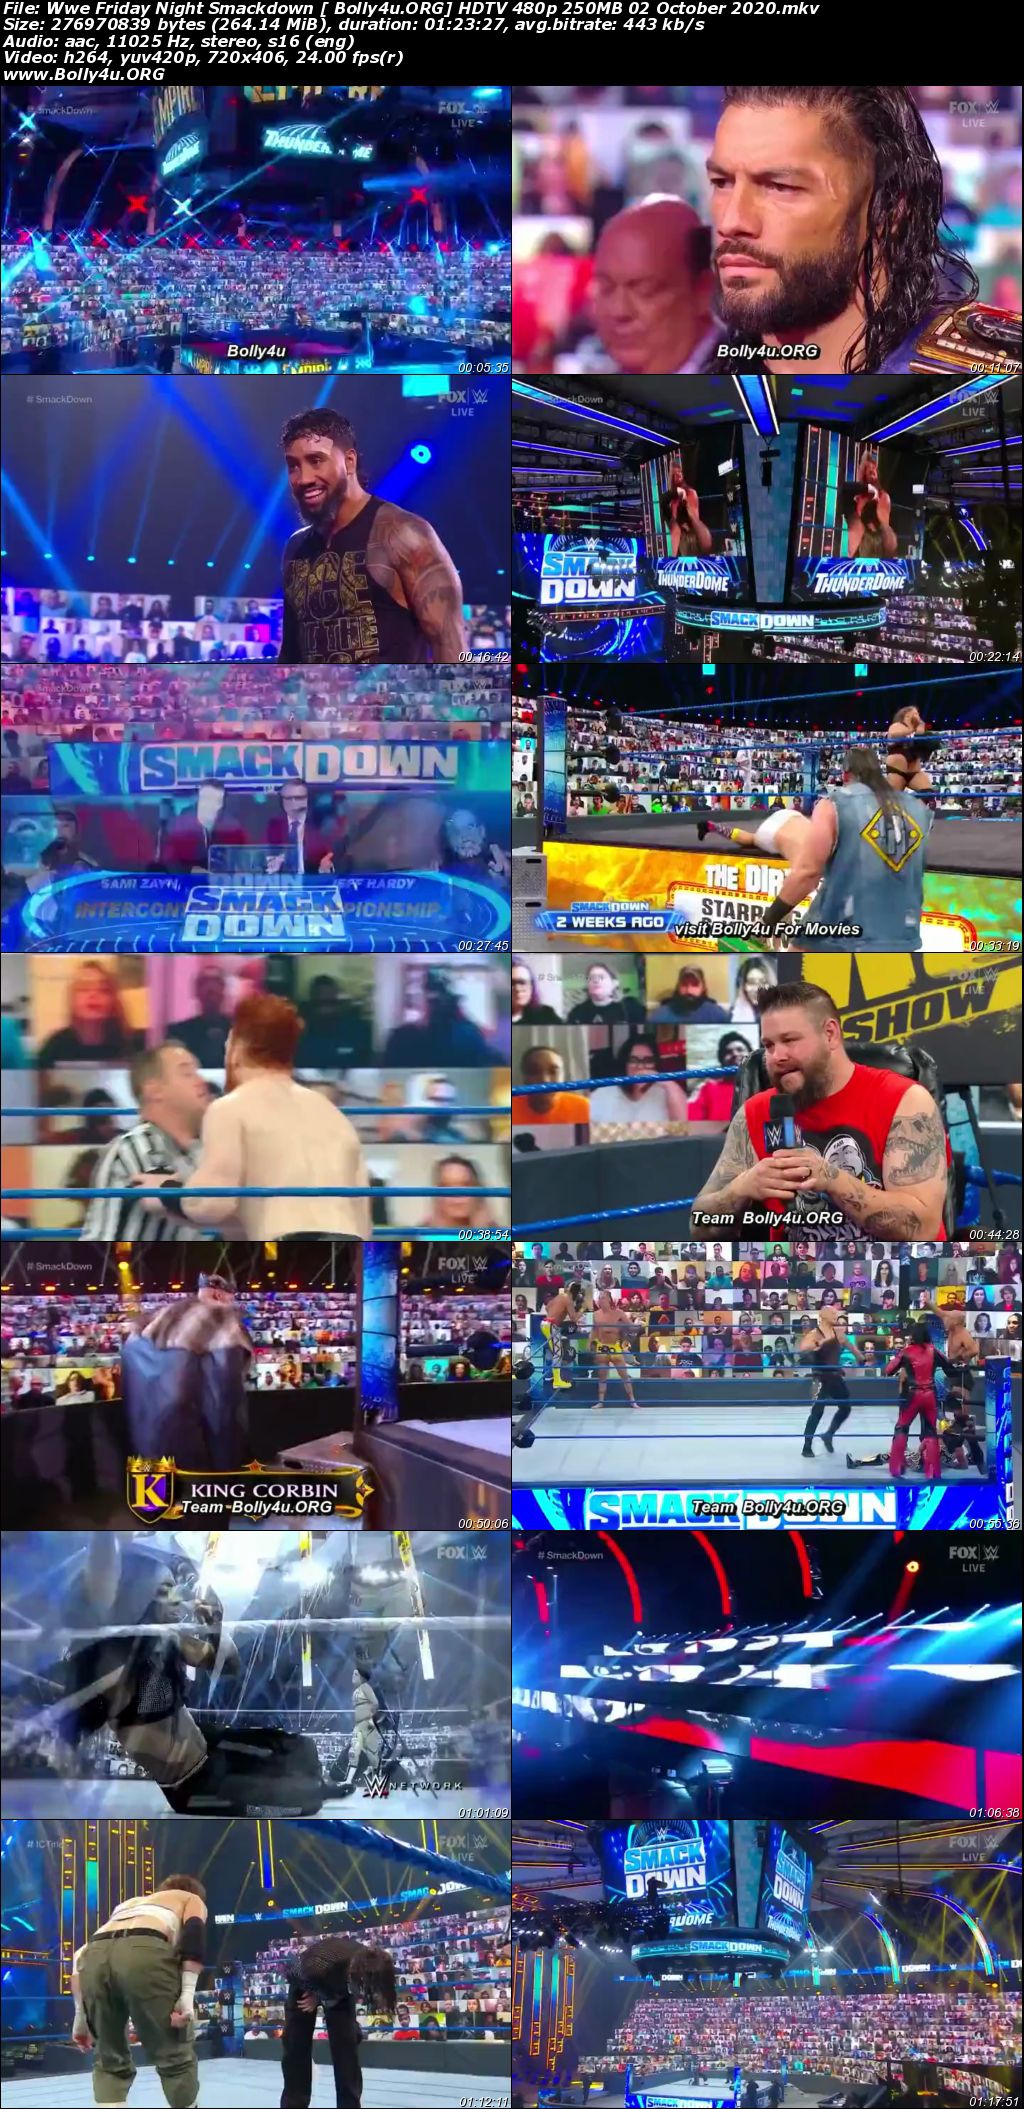 WWE Friday Night Smackdown HDTV 480p 250MB 02 October 2020 Download